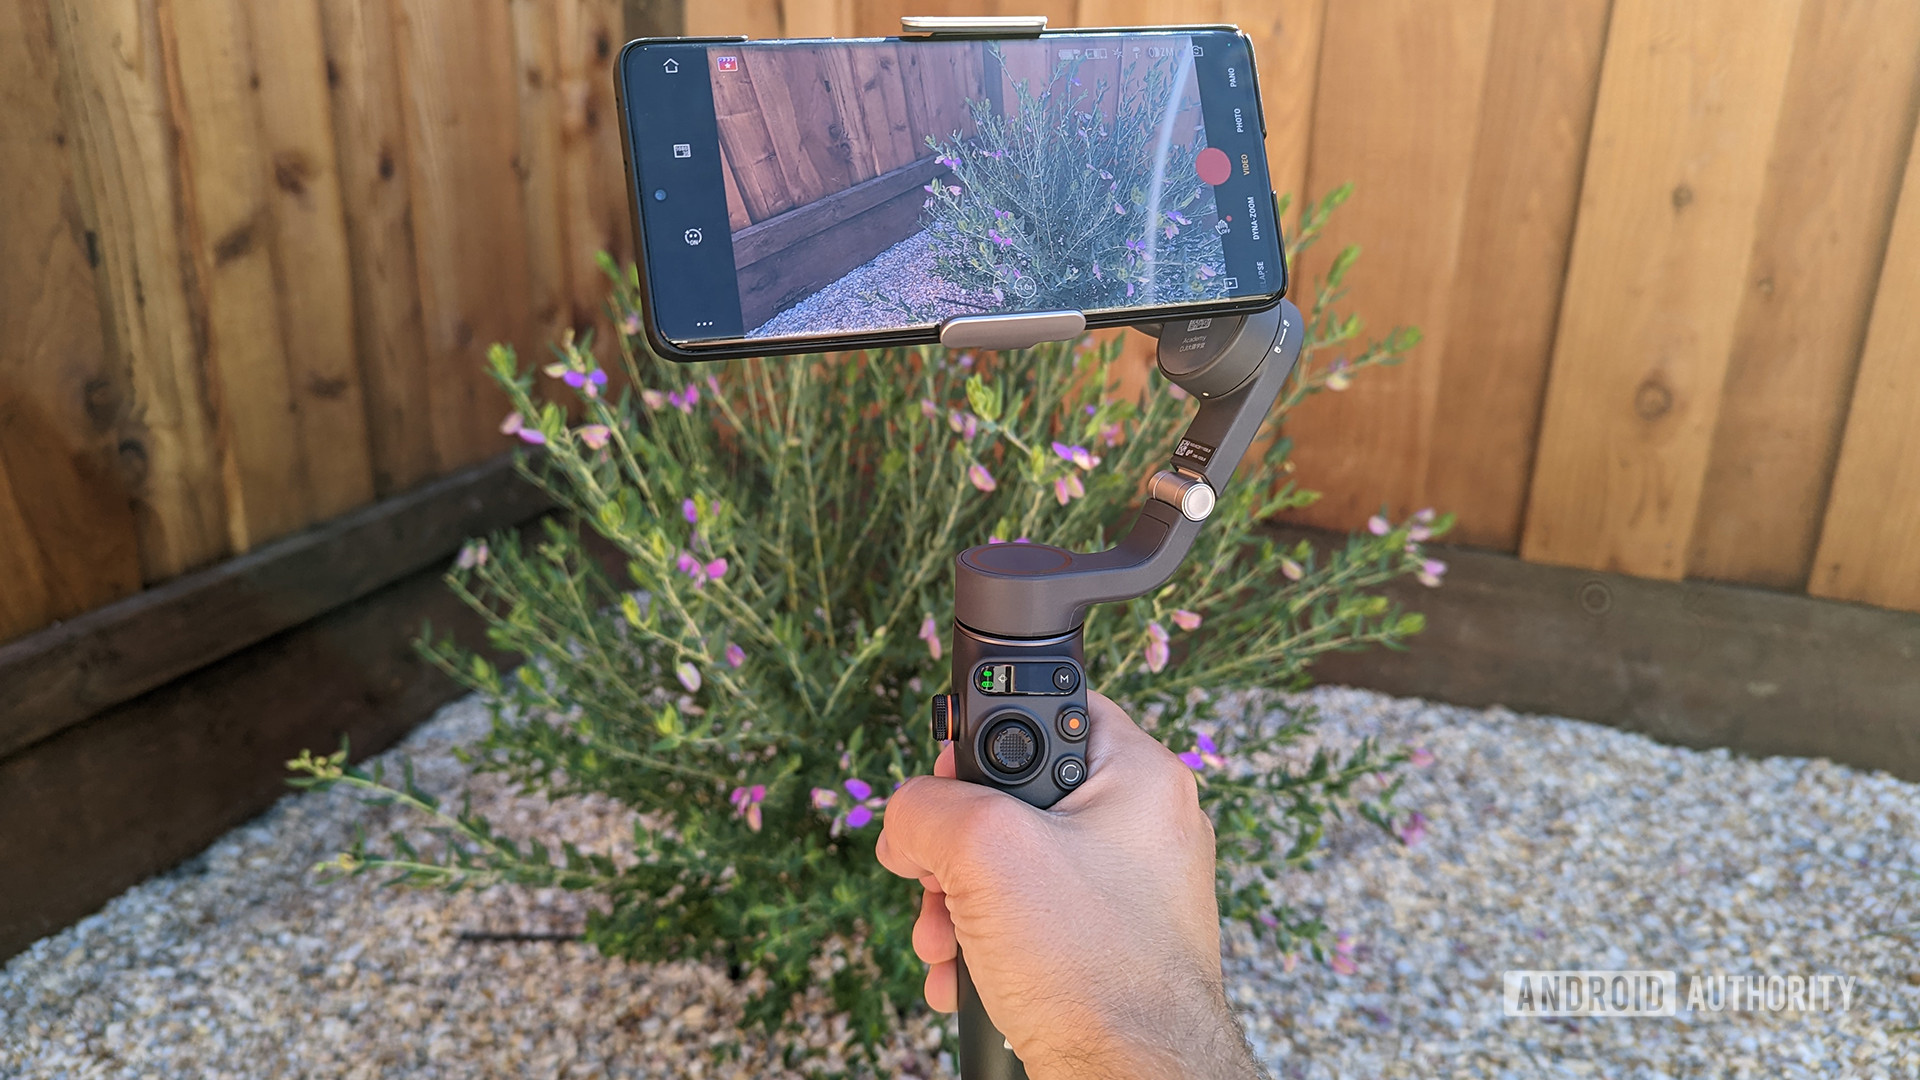 DJI Osmo Mobile 6 Review looking at some flowers - Smartphone gimbals